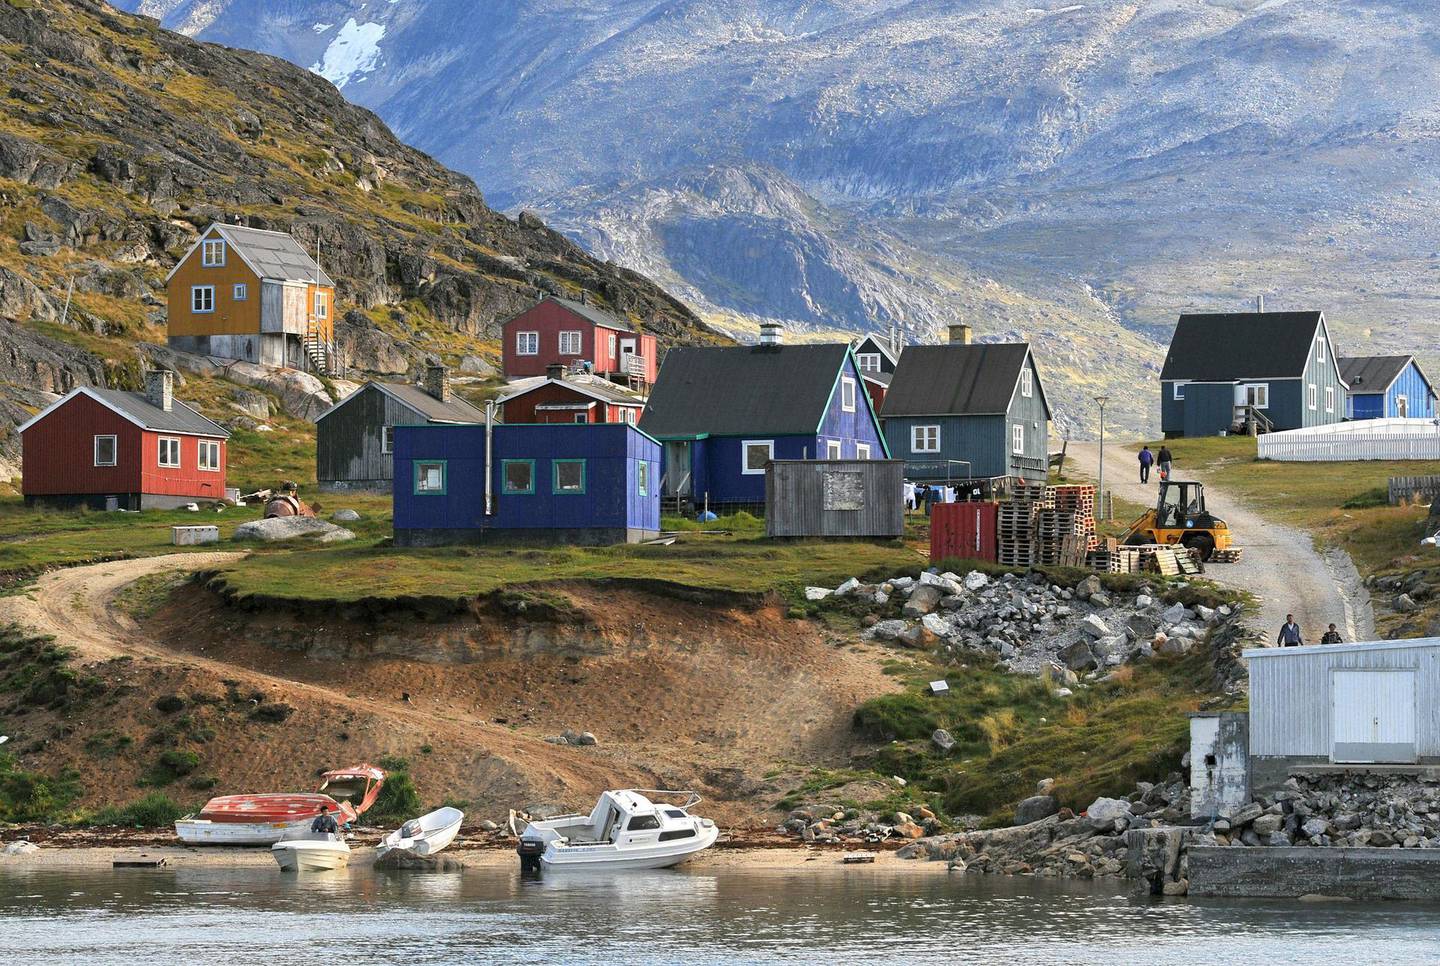 03 Sep 2010, Greenland --- Houses in southern Greenland, 03 September 2010. Climate change already got a grip on the giant island at the Arctic Circle. Photo: Wolfgang Heumer | Location: Narsaq, Greenland, Denmark. --- Image by © Wolfgang Heumer/dpa/Corbis